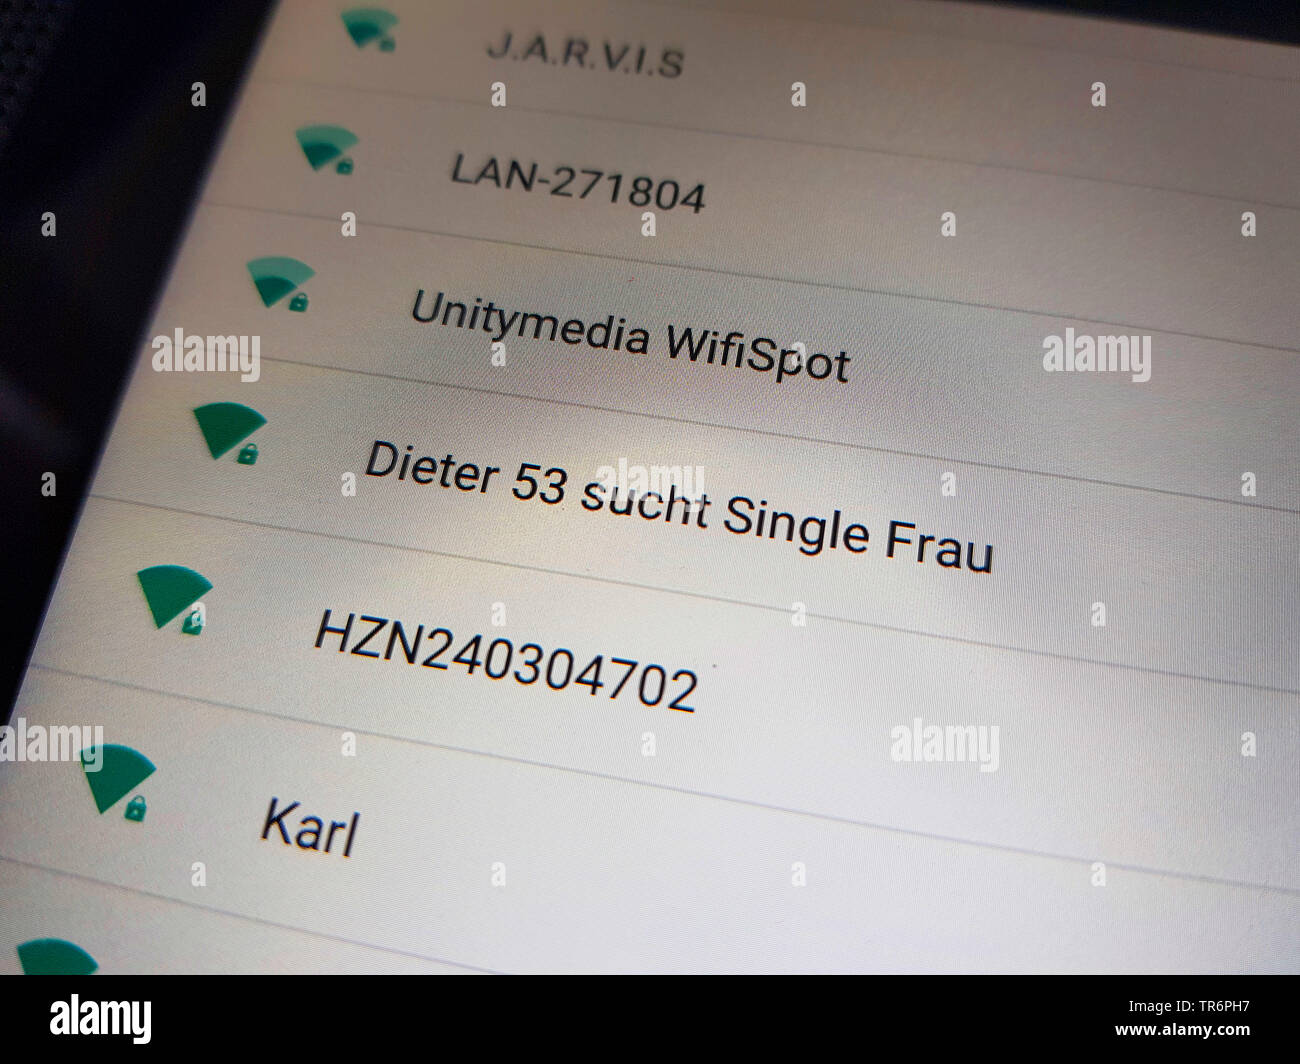 available Wi-Fi conections on a smartphone, Dieter 53 such single Frau, Dieter 53 looking for single woman Stock Photo